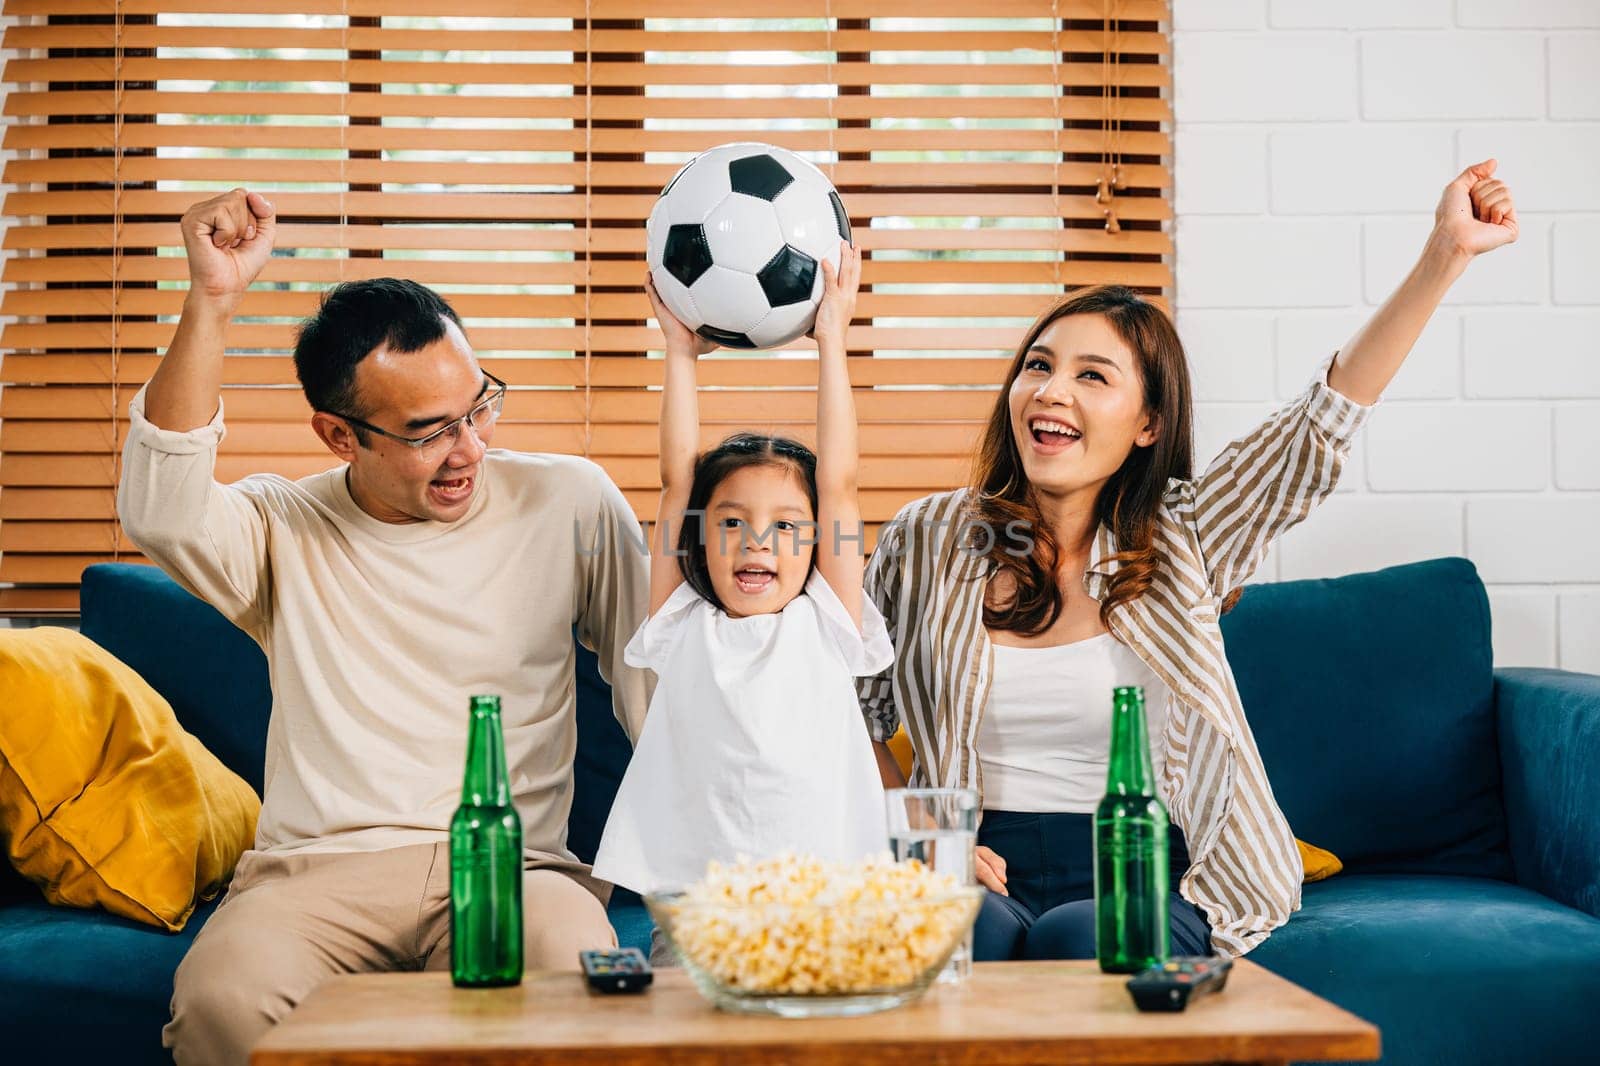 Delighted parents and children, armed with popcorn and a ball, raise their arms and shout in excitement while watching a football match. Their togetherness and bonding celebrate a moment of triumph.